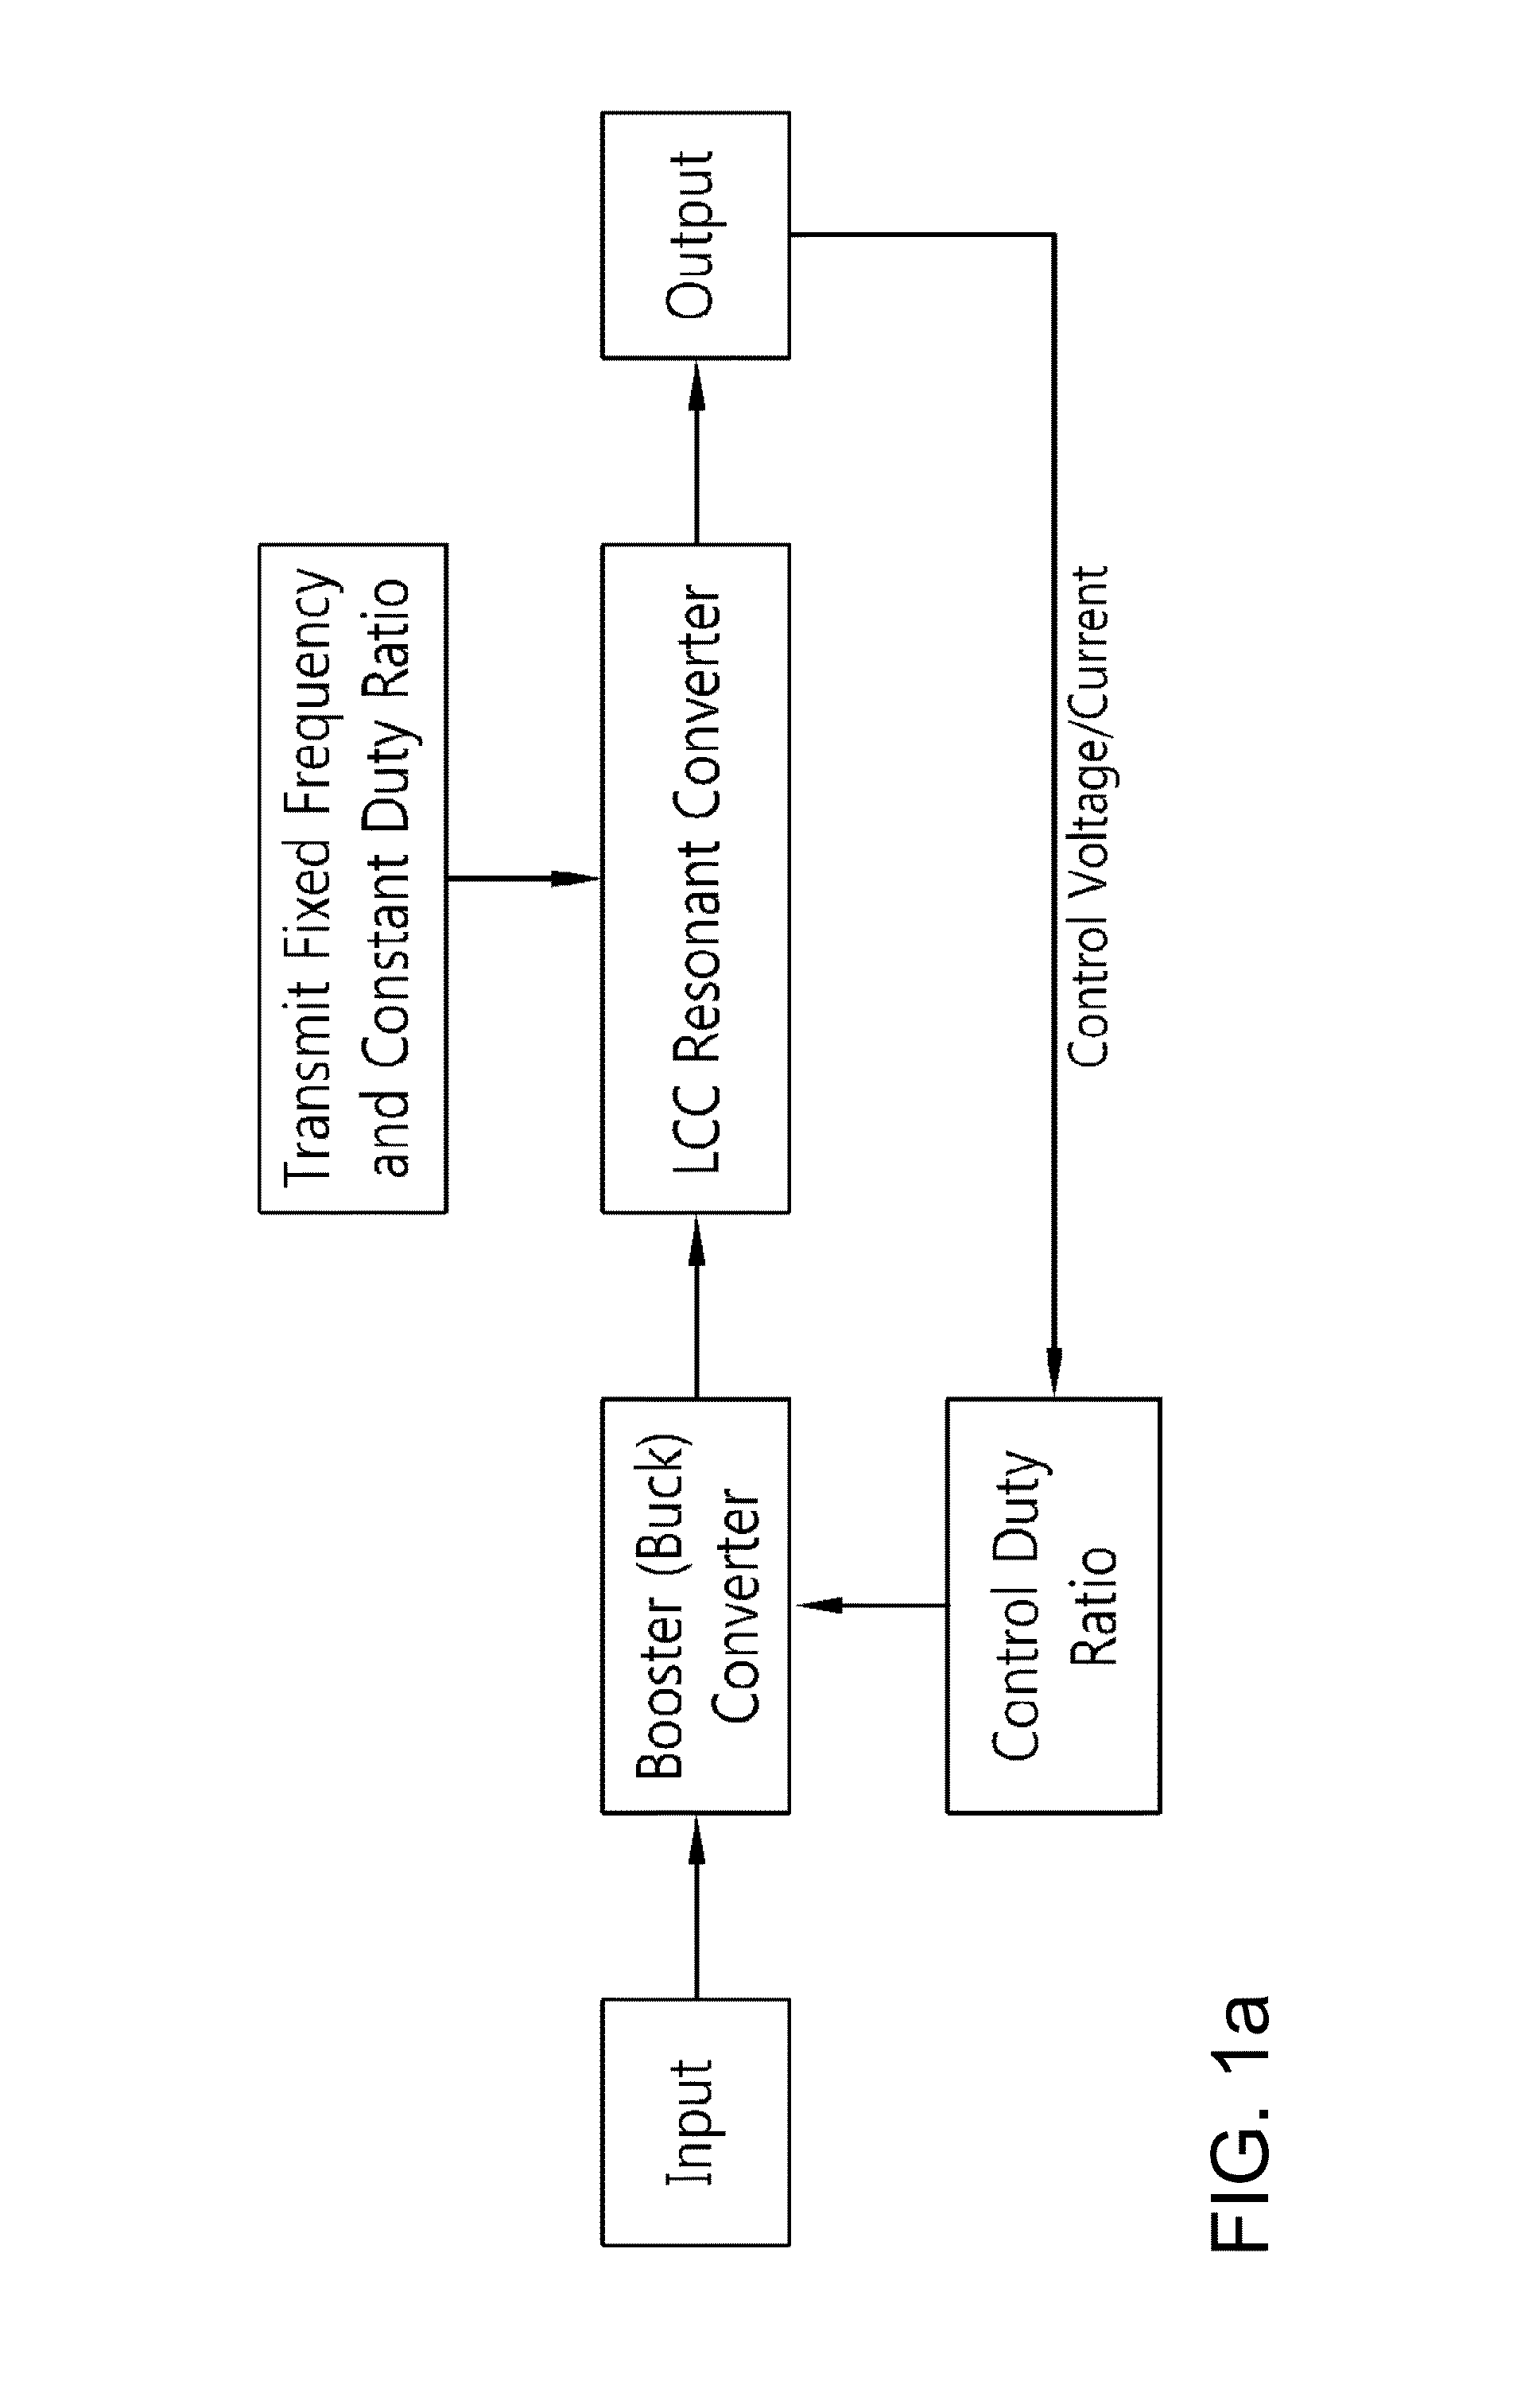 Two-stage insulated bidirectional DC/DC power converter using a constant duty ratio LLC resonant converter